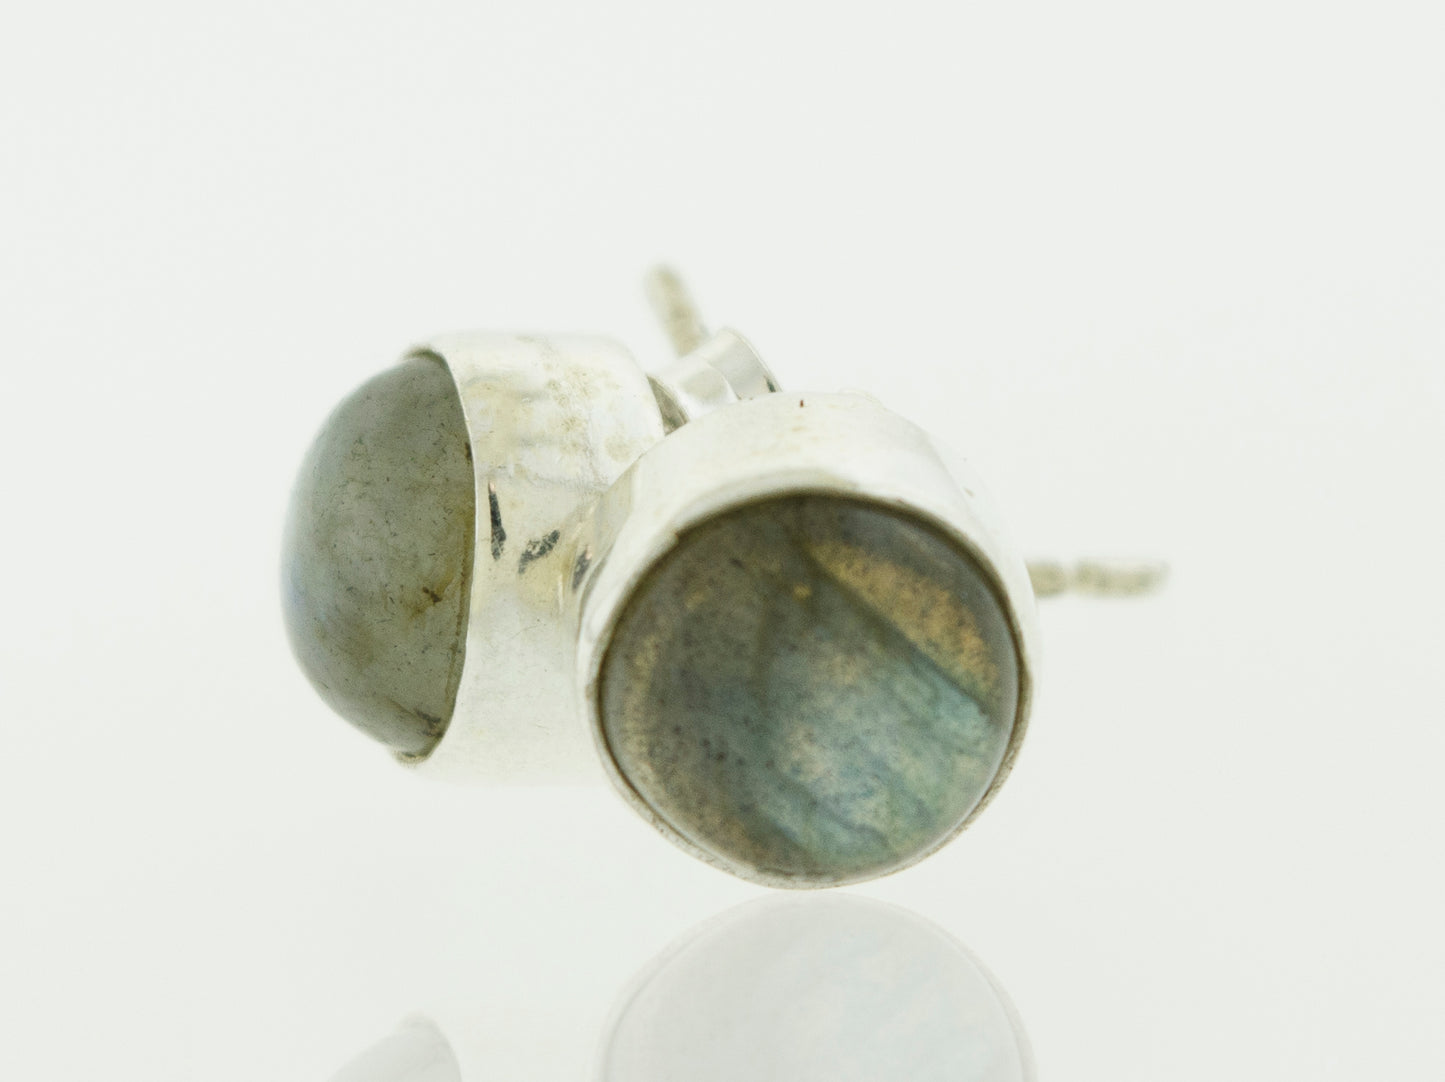 A pair of Simple Circle Labradorite stud earrings by Super Silver on a white surface, perfect for every day wear.